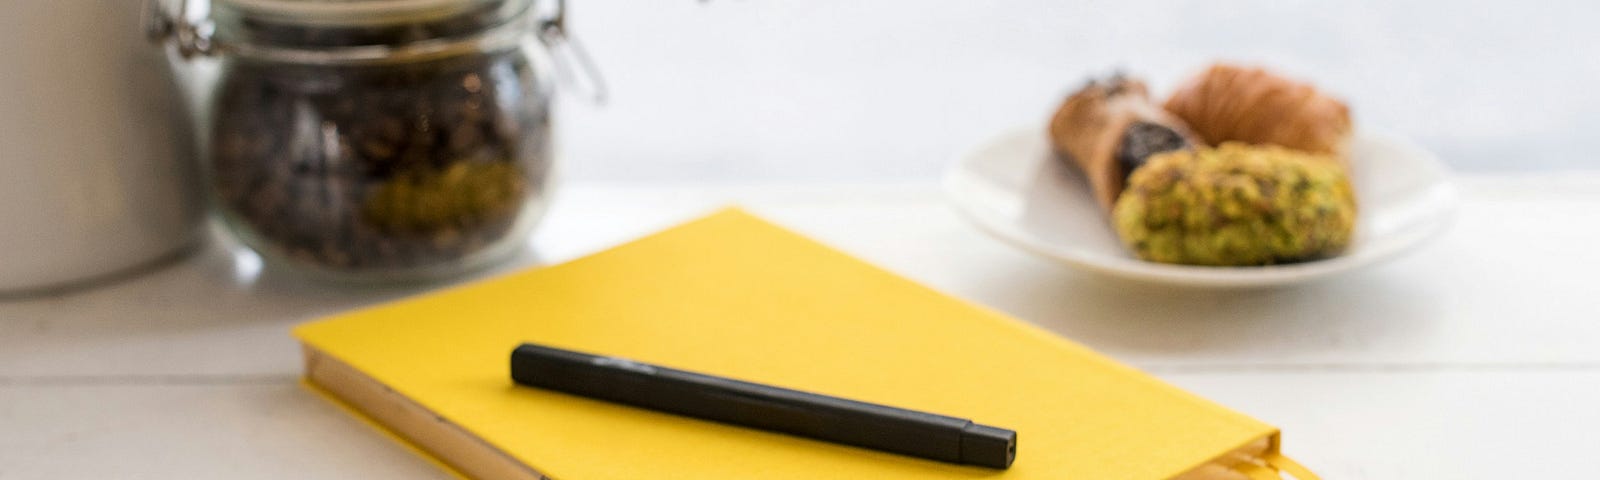 A yellow notebook with a black pen resting on the cover on a table with pastries and a jar of coffee on it.